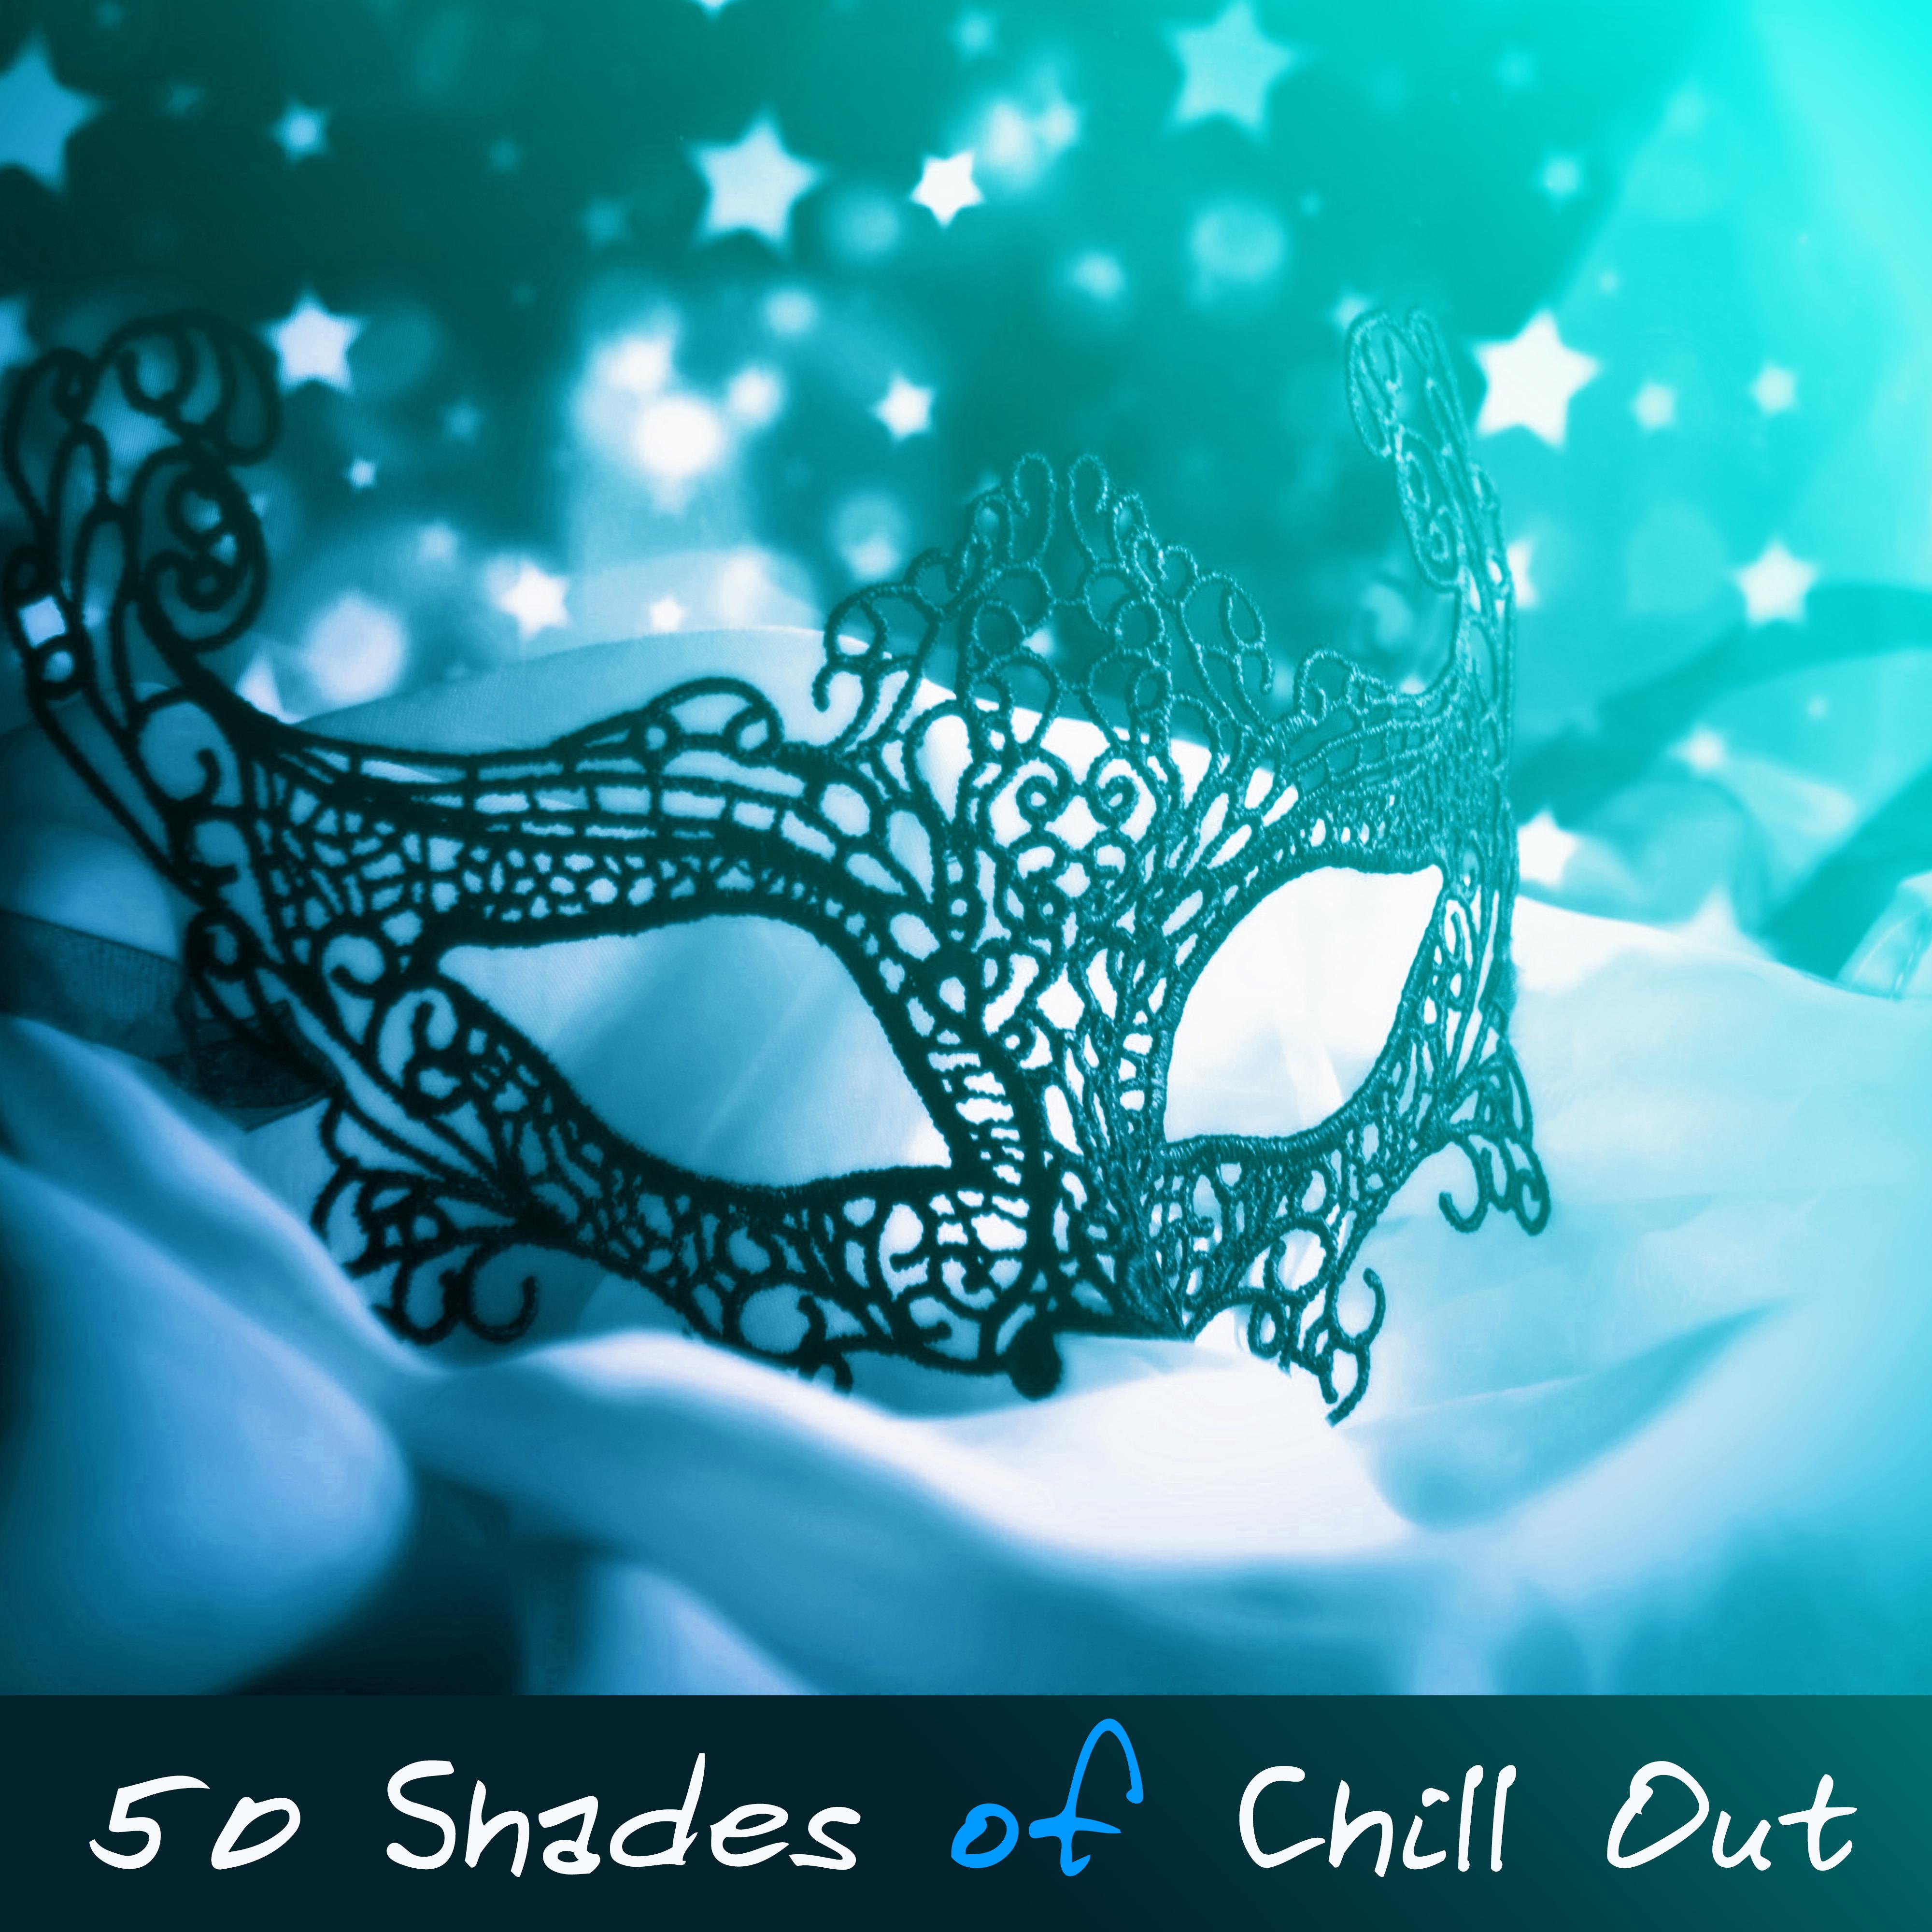 50 Shades of Chill Out – **** Chill Out, Lounge, Sensual, Tantric ***, 69 Love Songs